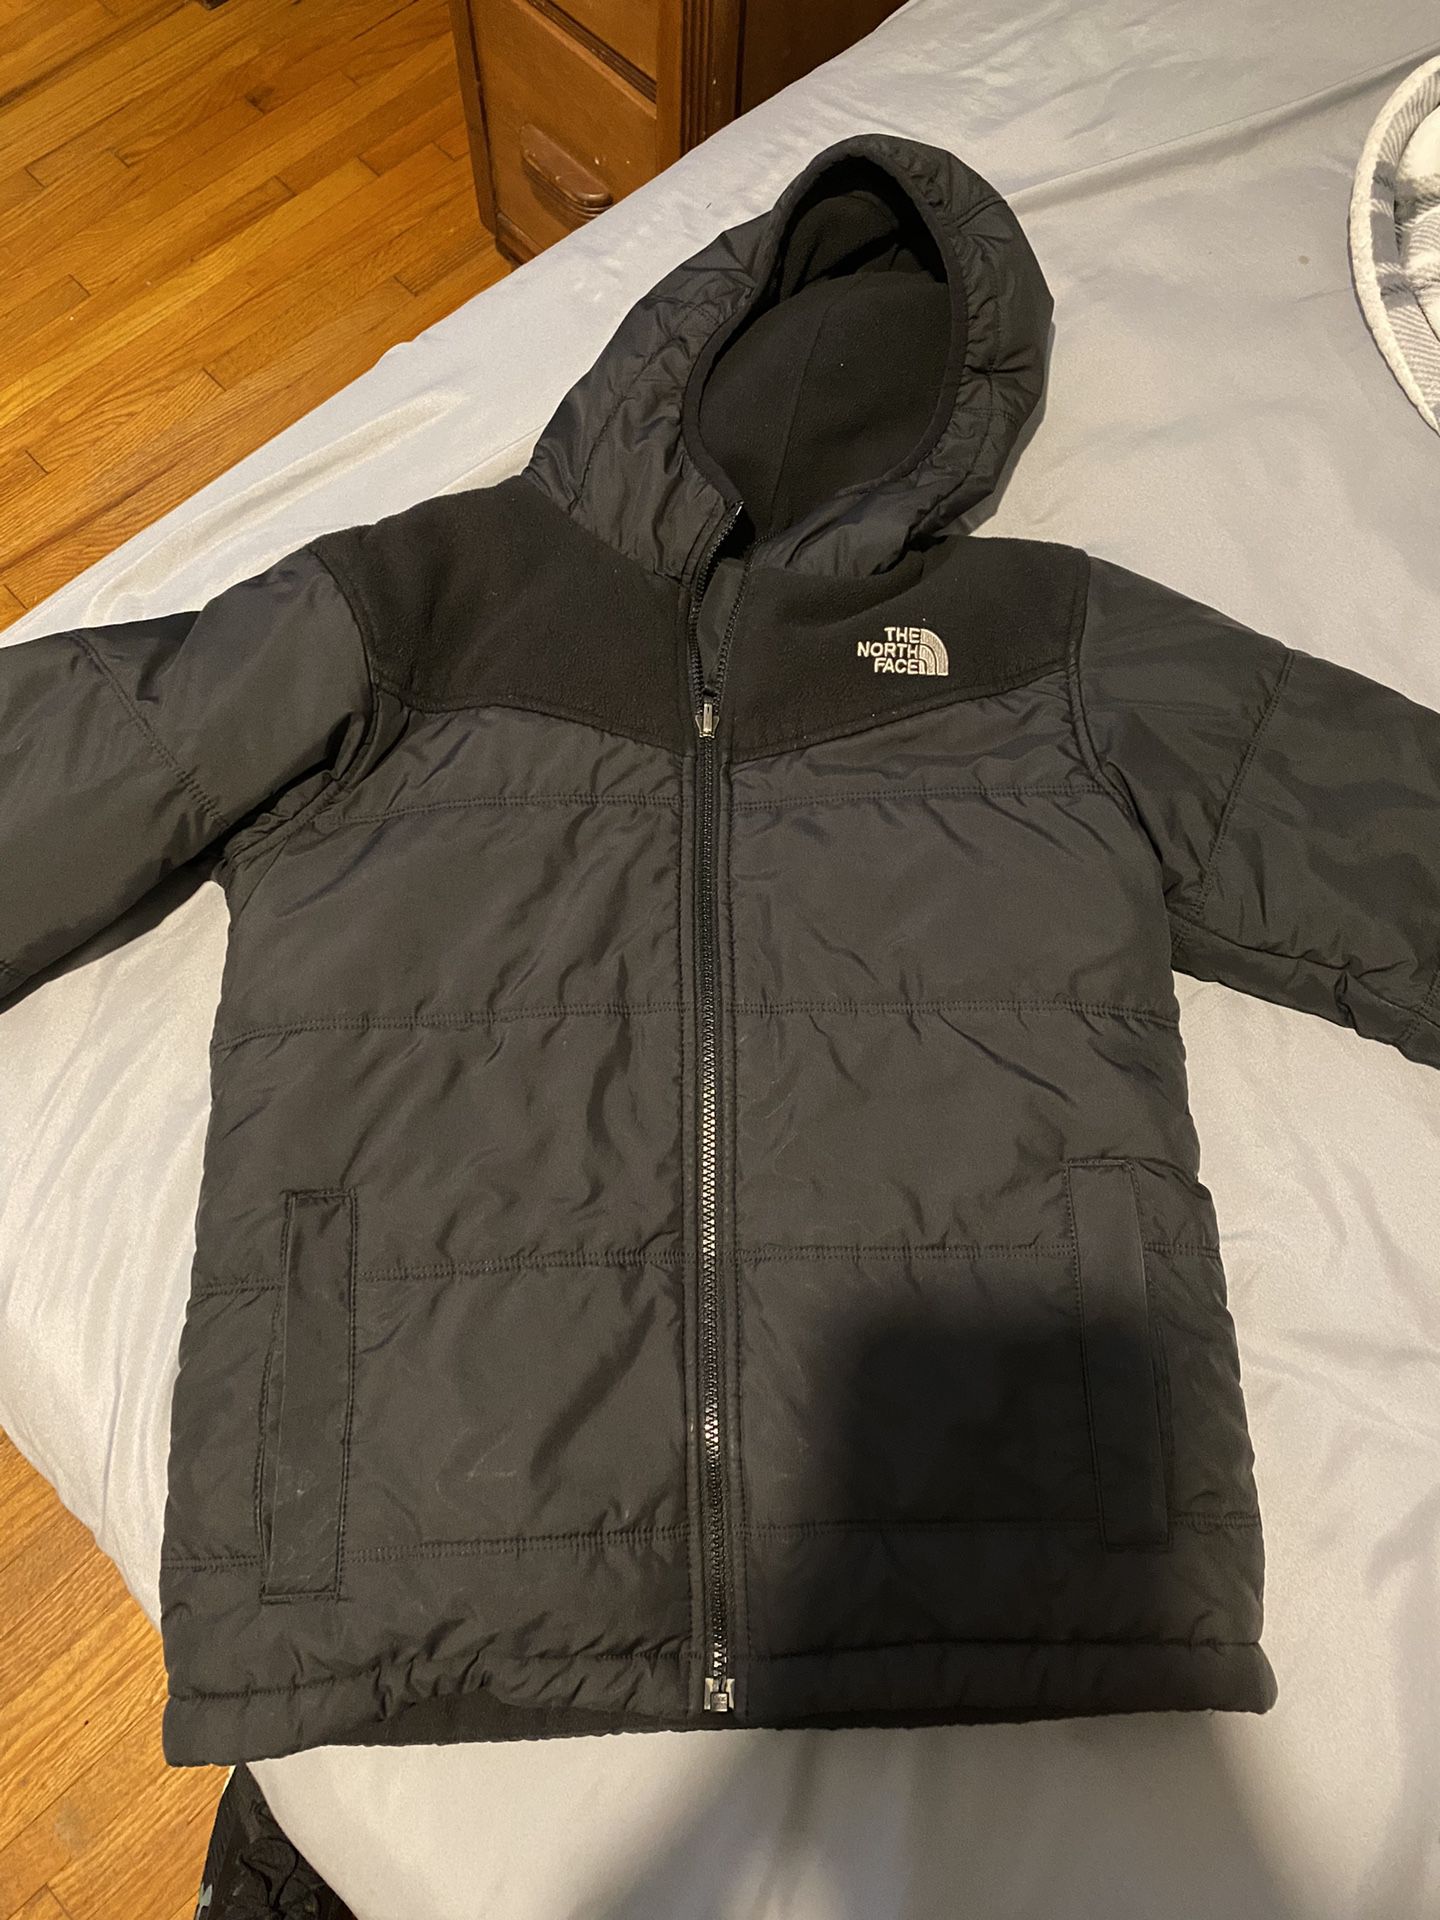 North face Winter Puffer Jacket YLG Boys 